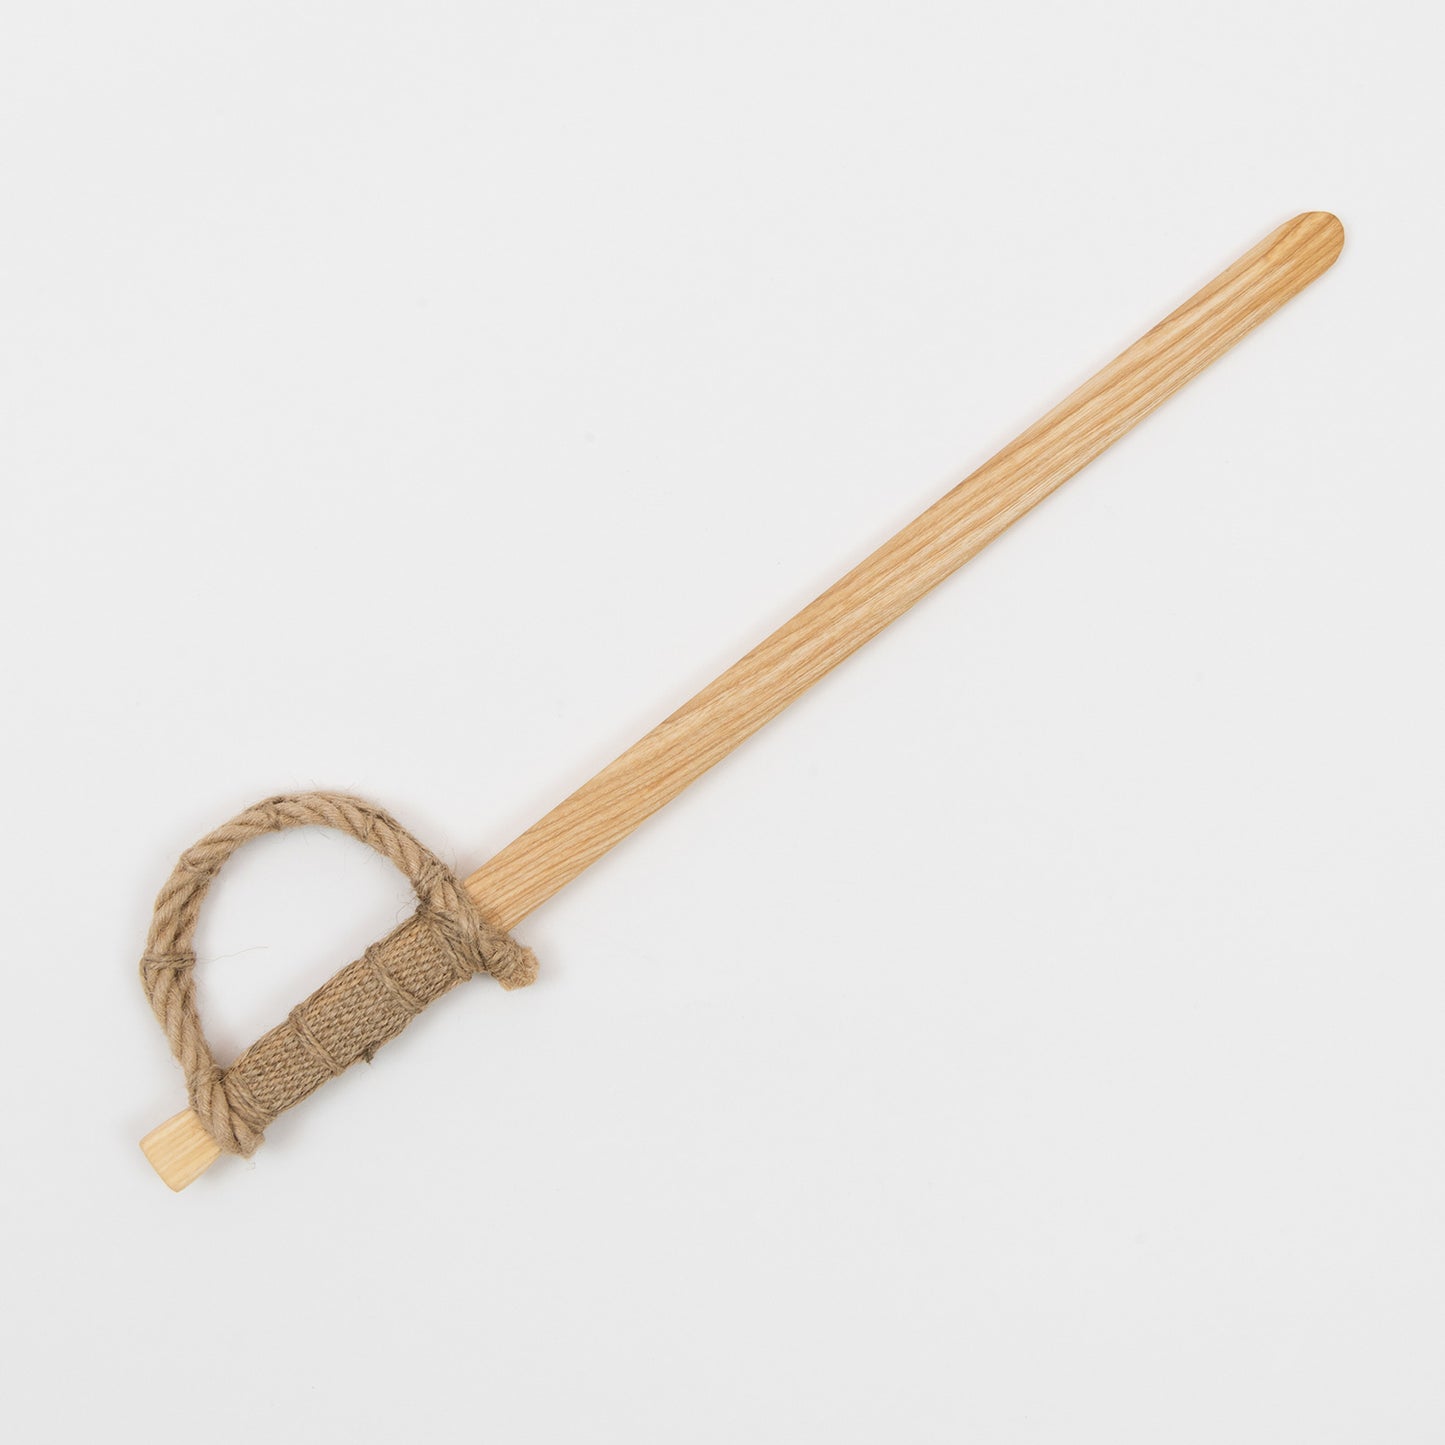 A wooden toy pirate sword pictured on a white background.